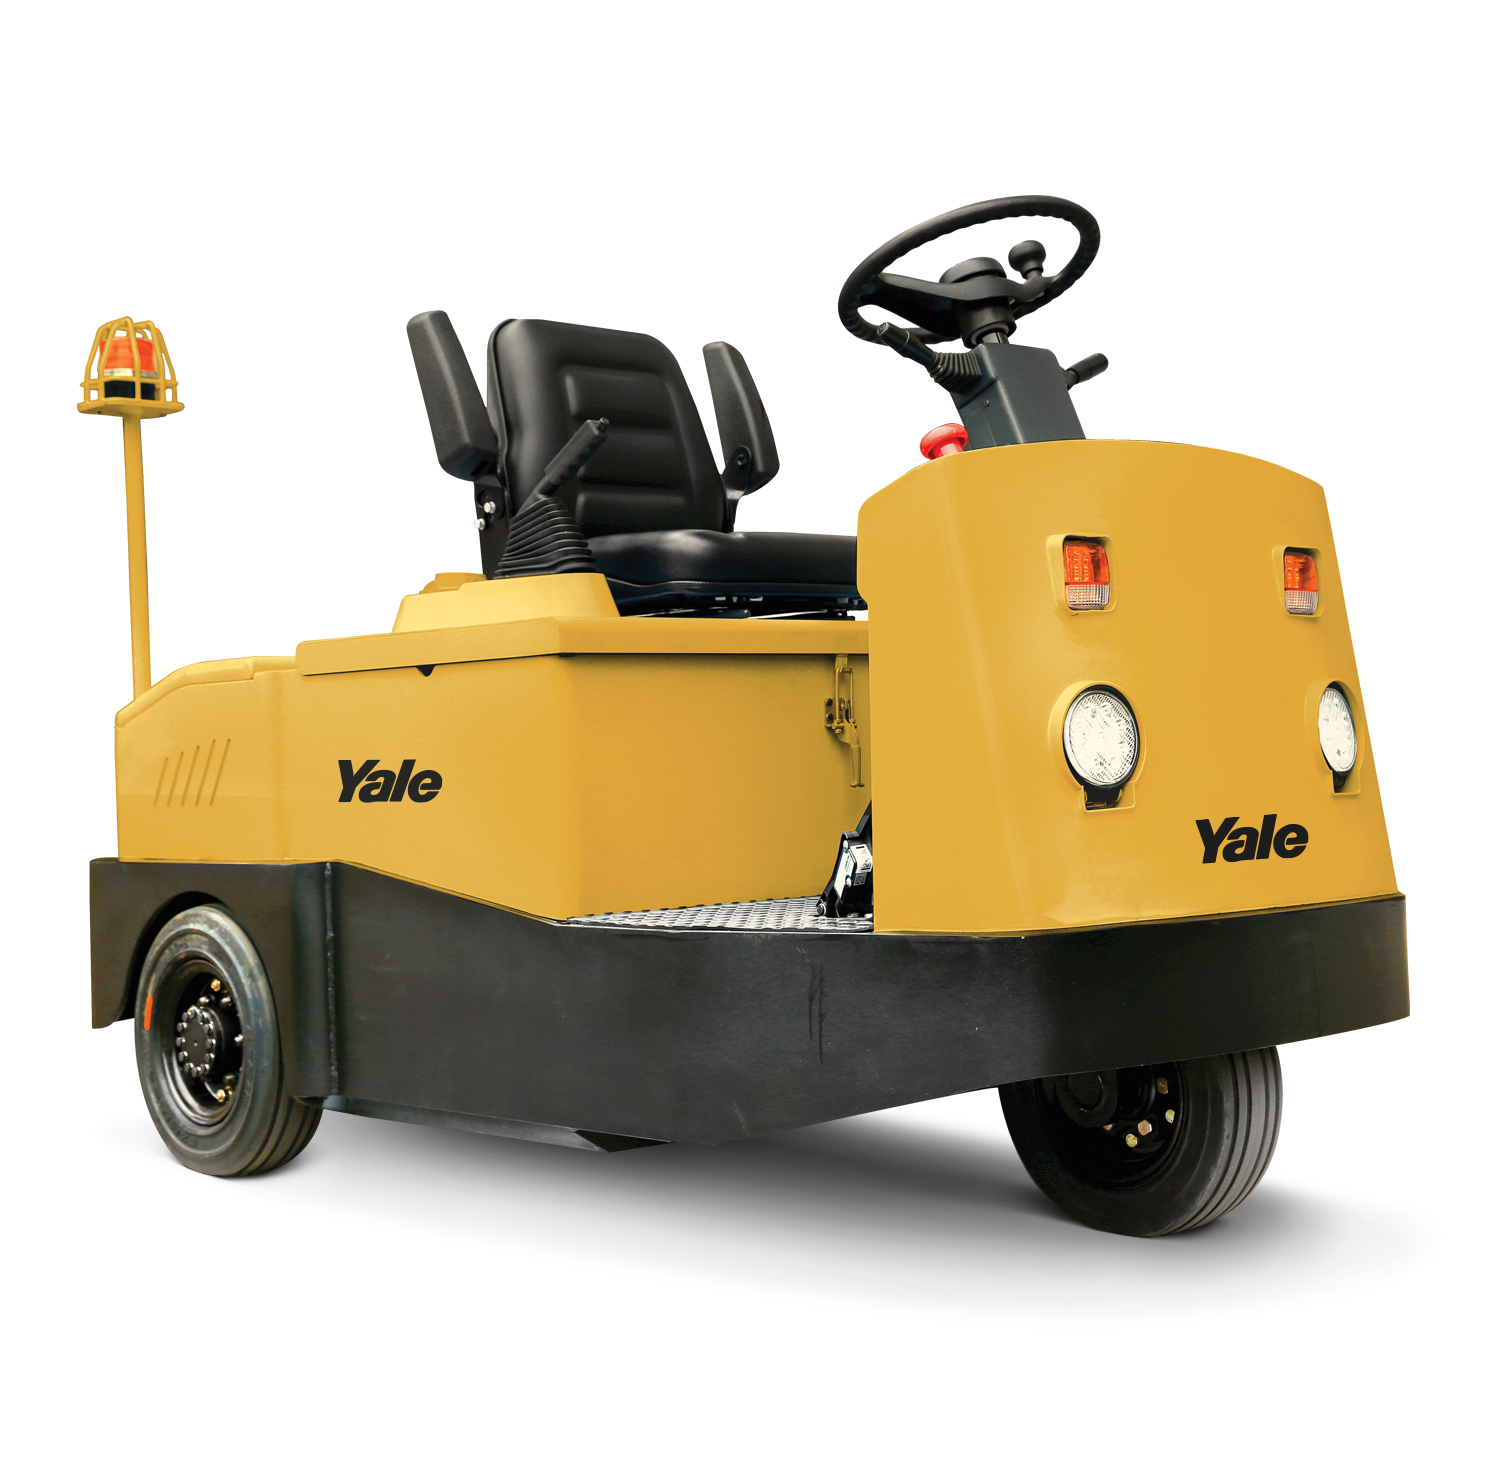 Sit down electric tow tractor by Yale